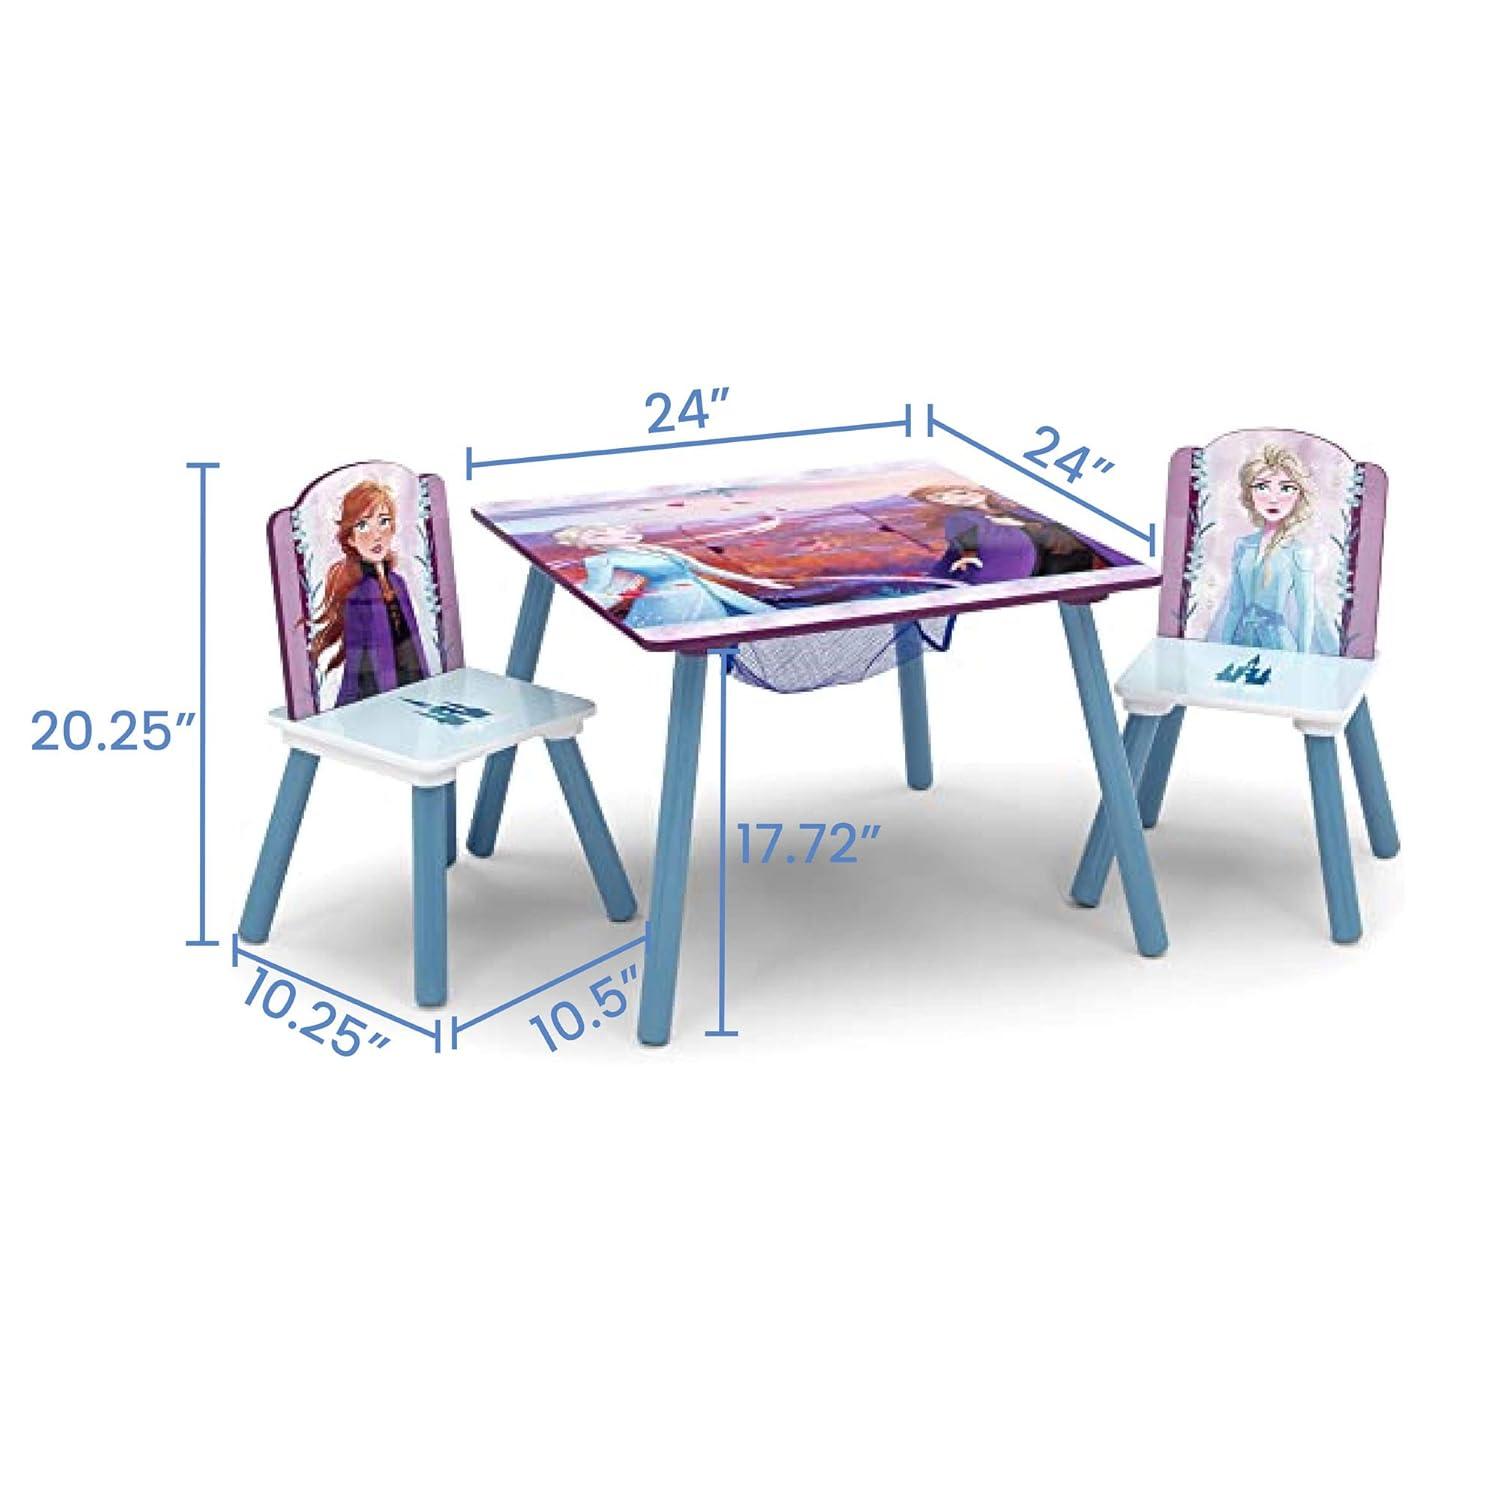 Elsa and Anna Inspired Kid-Sized Table and Chair Set with Storage